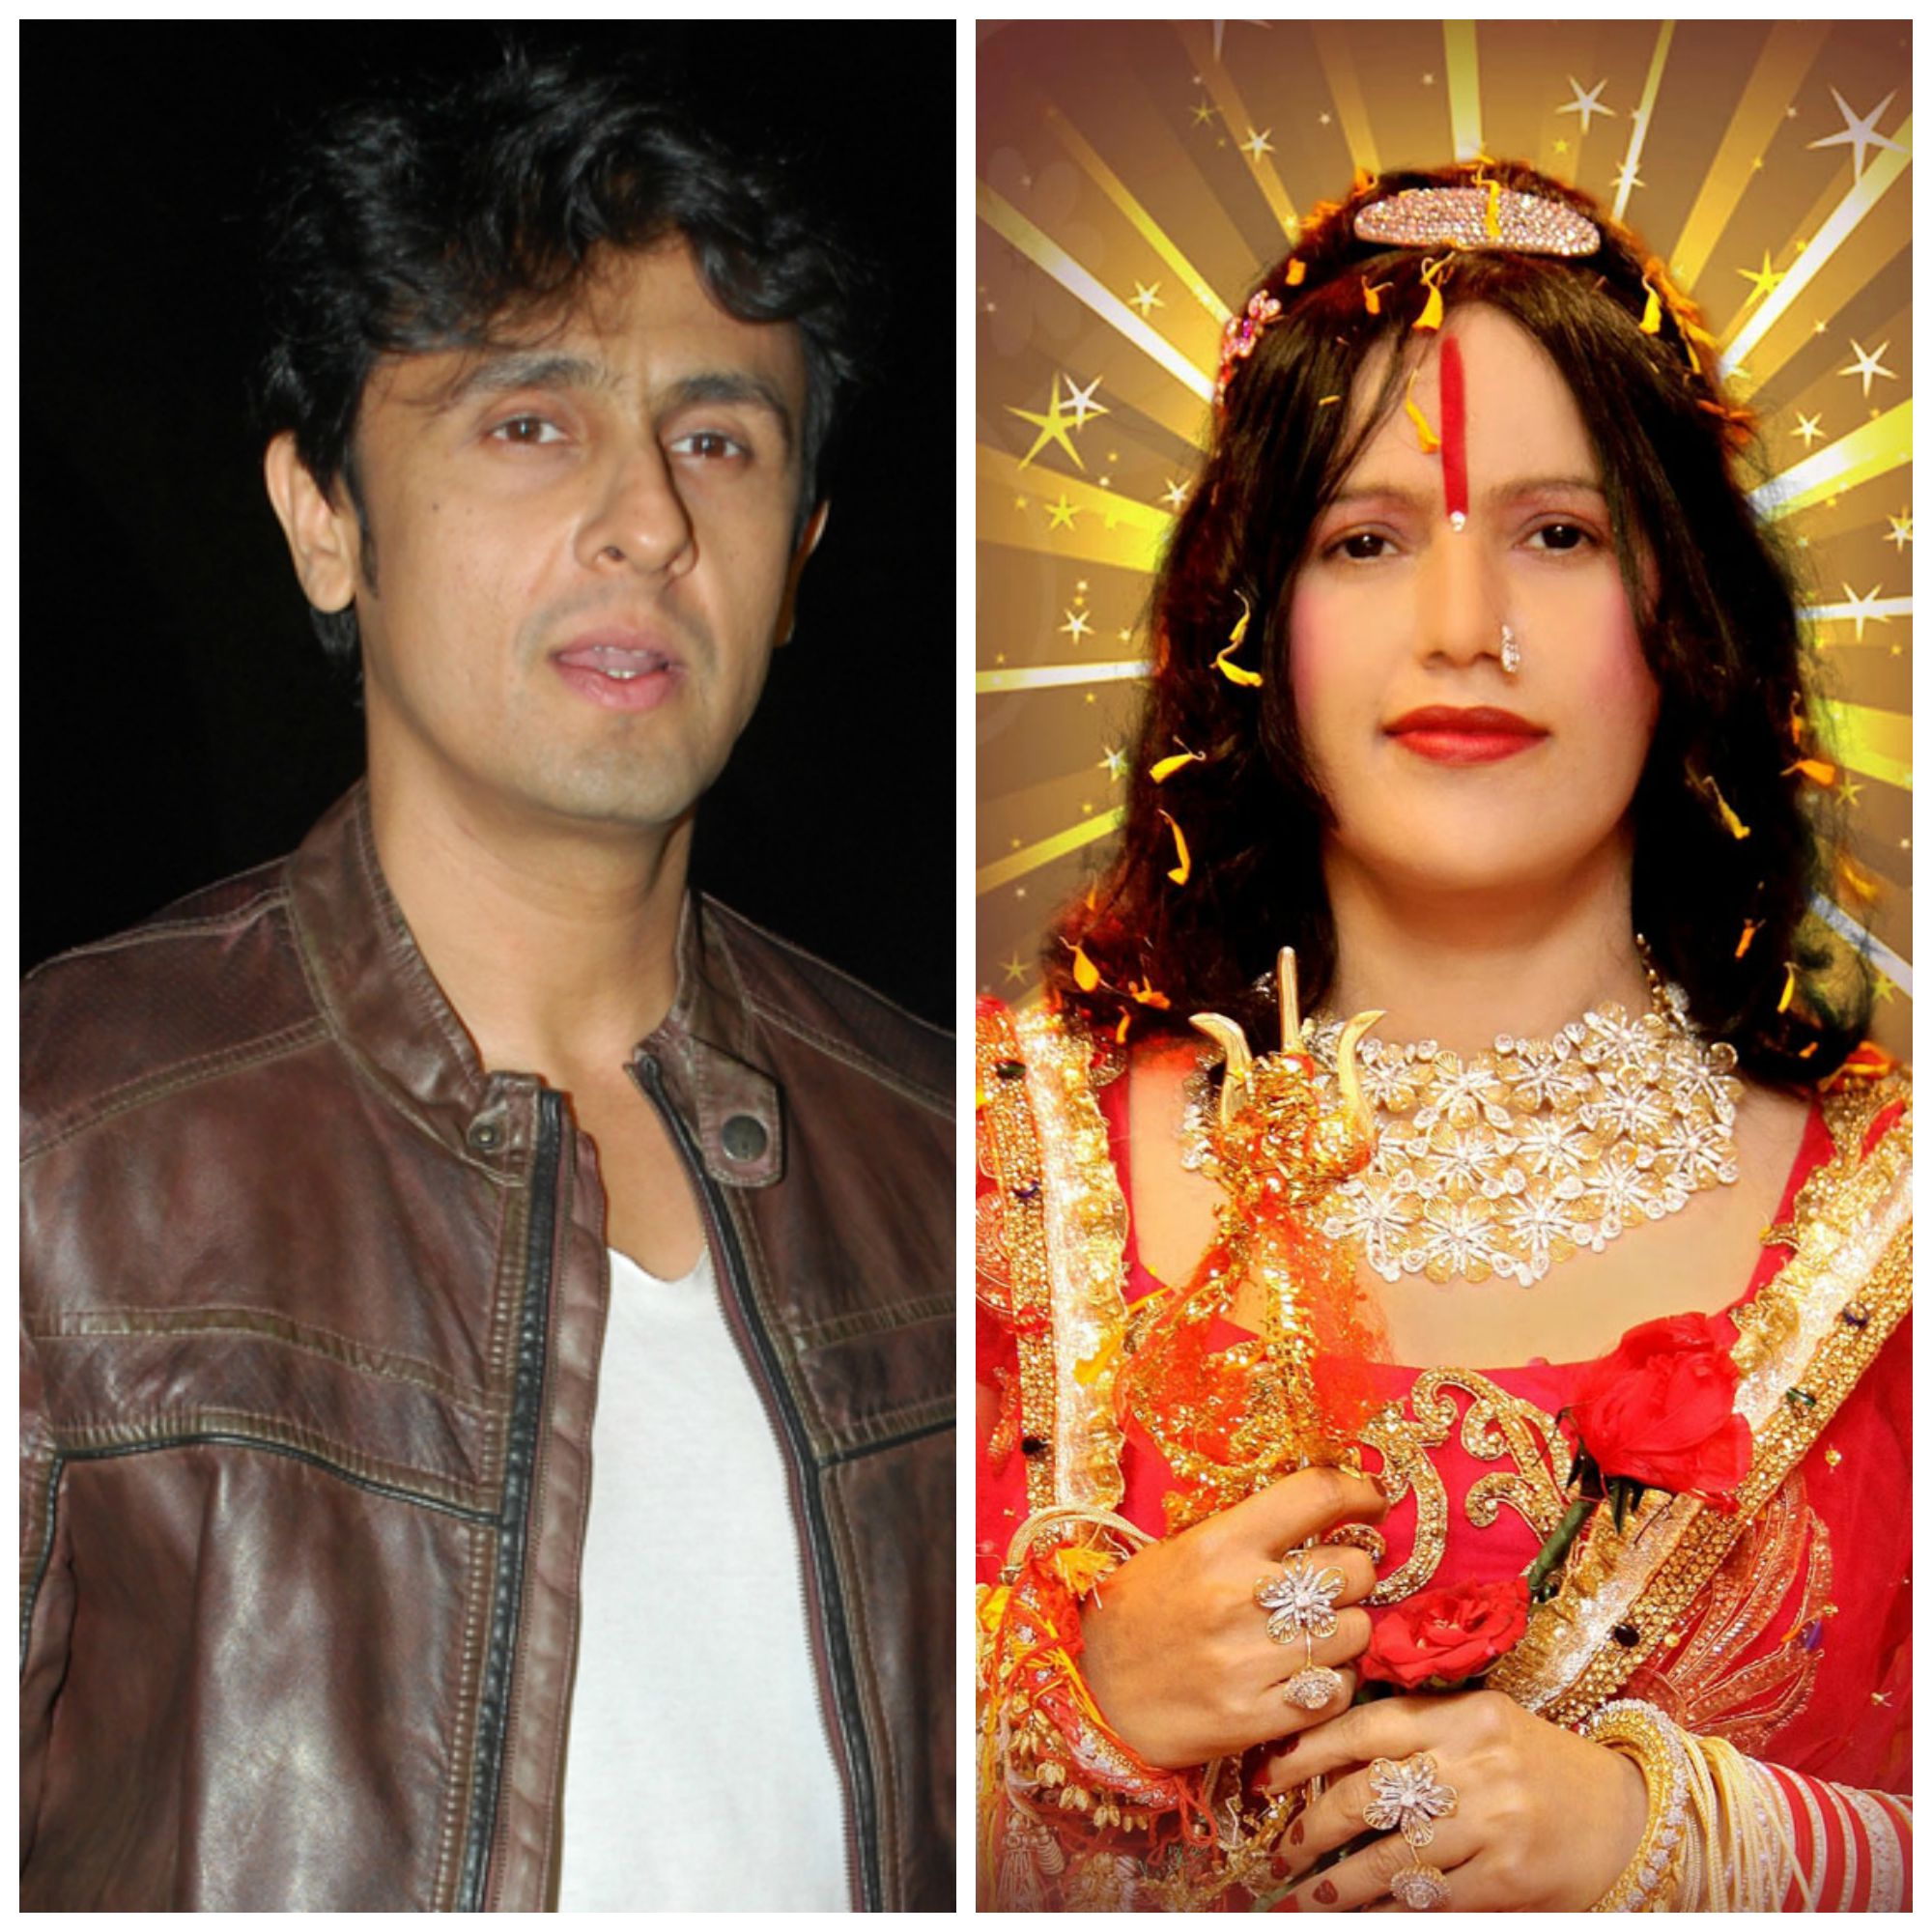 Sonu Nigam Compares Radhe Maa To Kali Maa And Gets Trolled On Twitter!